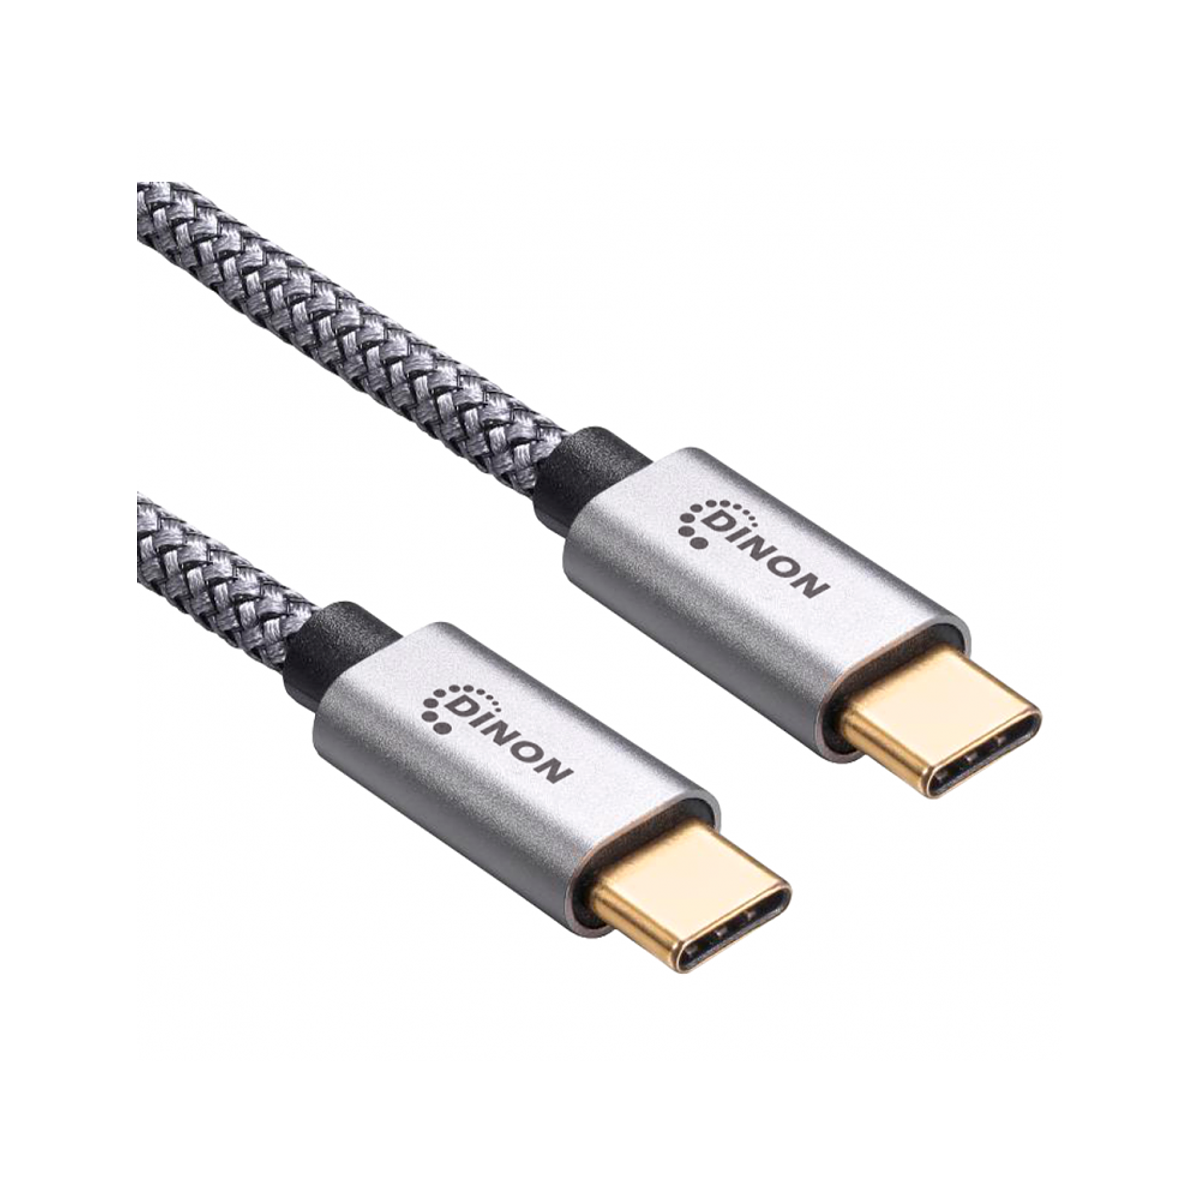 CABLE USB-C A USB-C 3.1, 10GBPS, 3MTS, CONECTOR METALICO,...